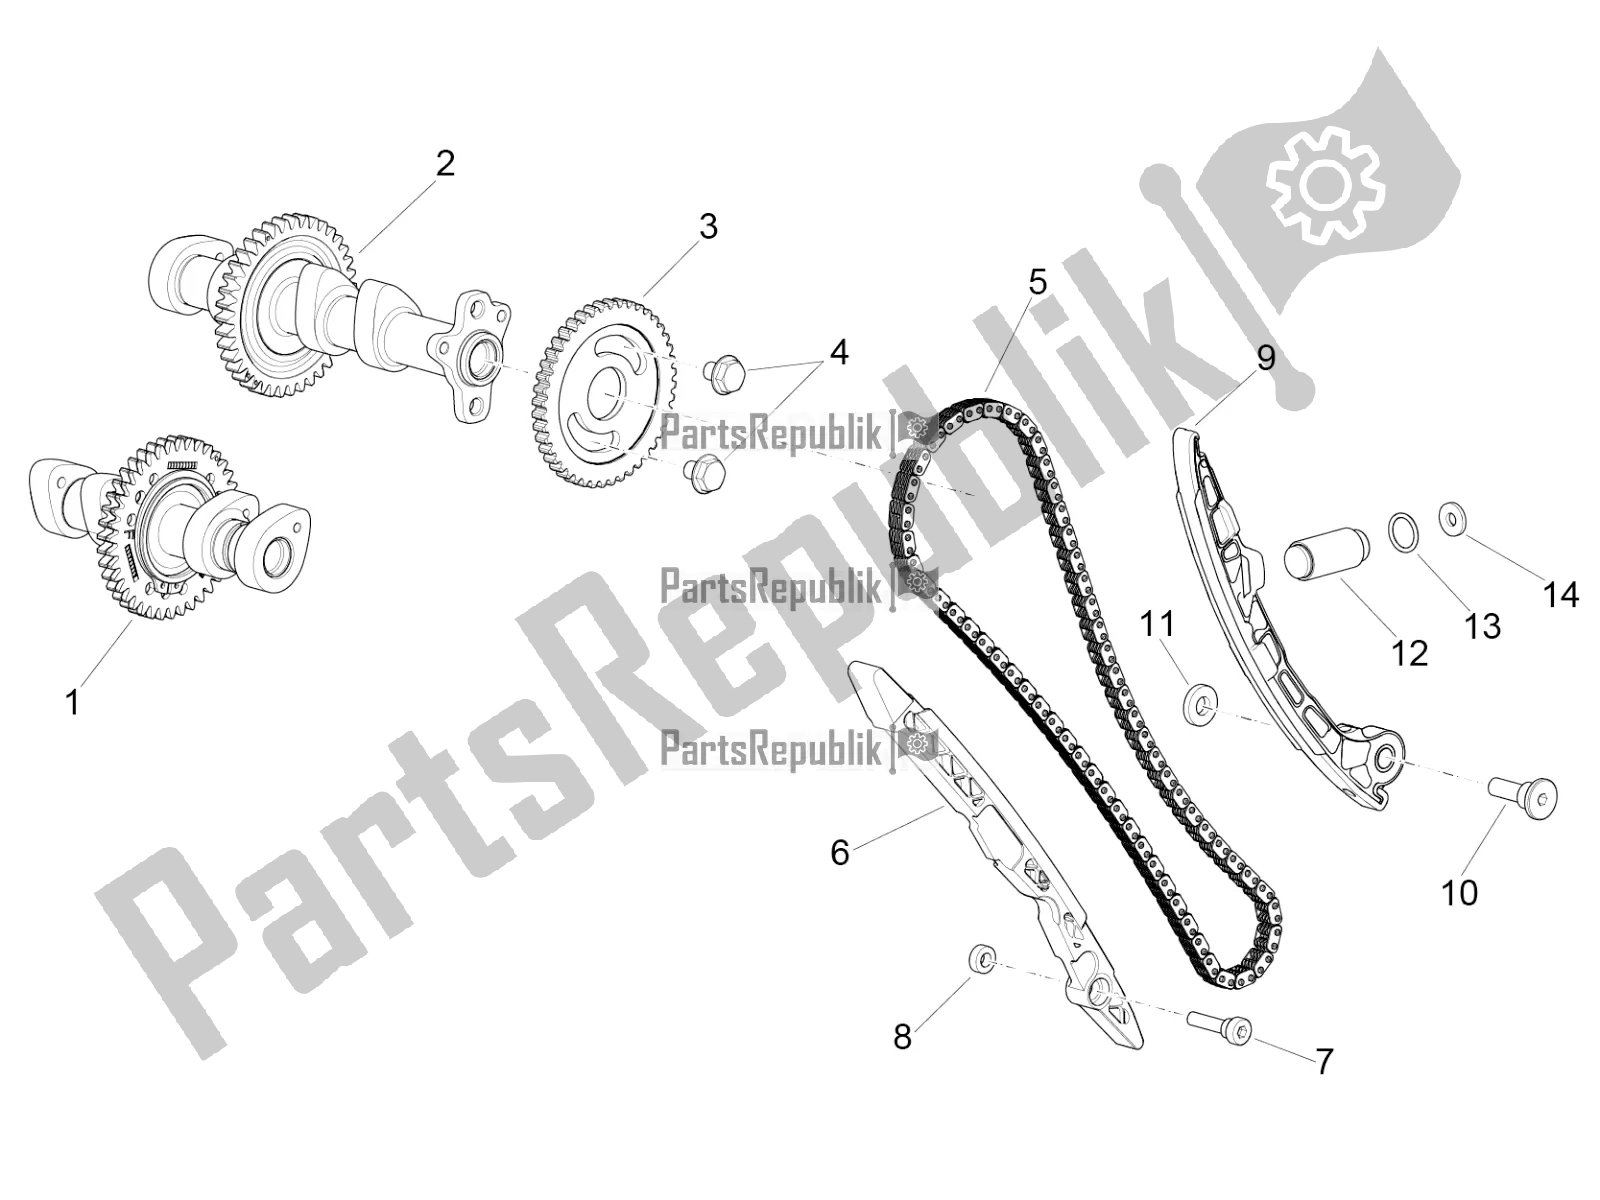 All parts for the Front Cylinder Timing System of the Aprilia RSV4 RR ABS 1000 2019